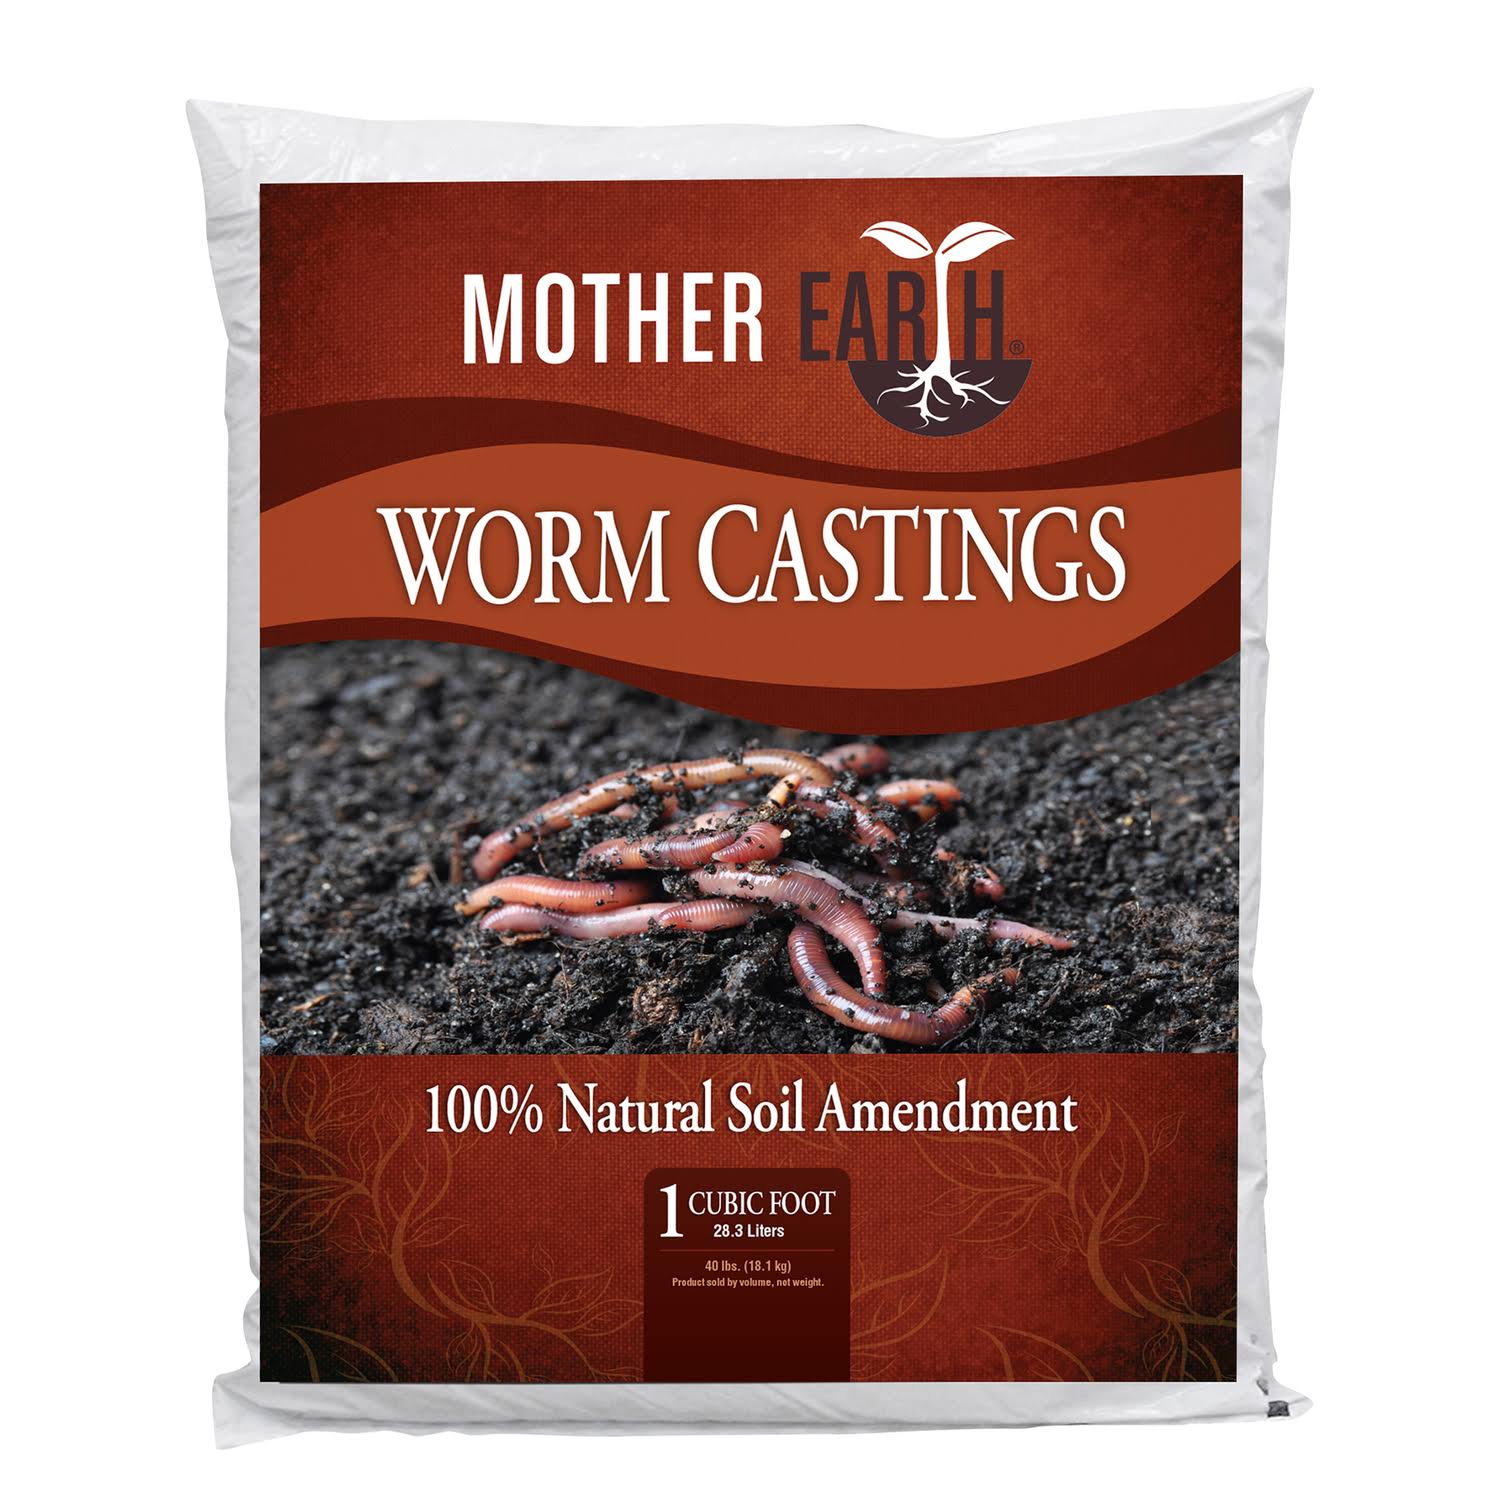 Mother Earth Worm Castings - 1 Cubic Feet